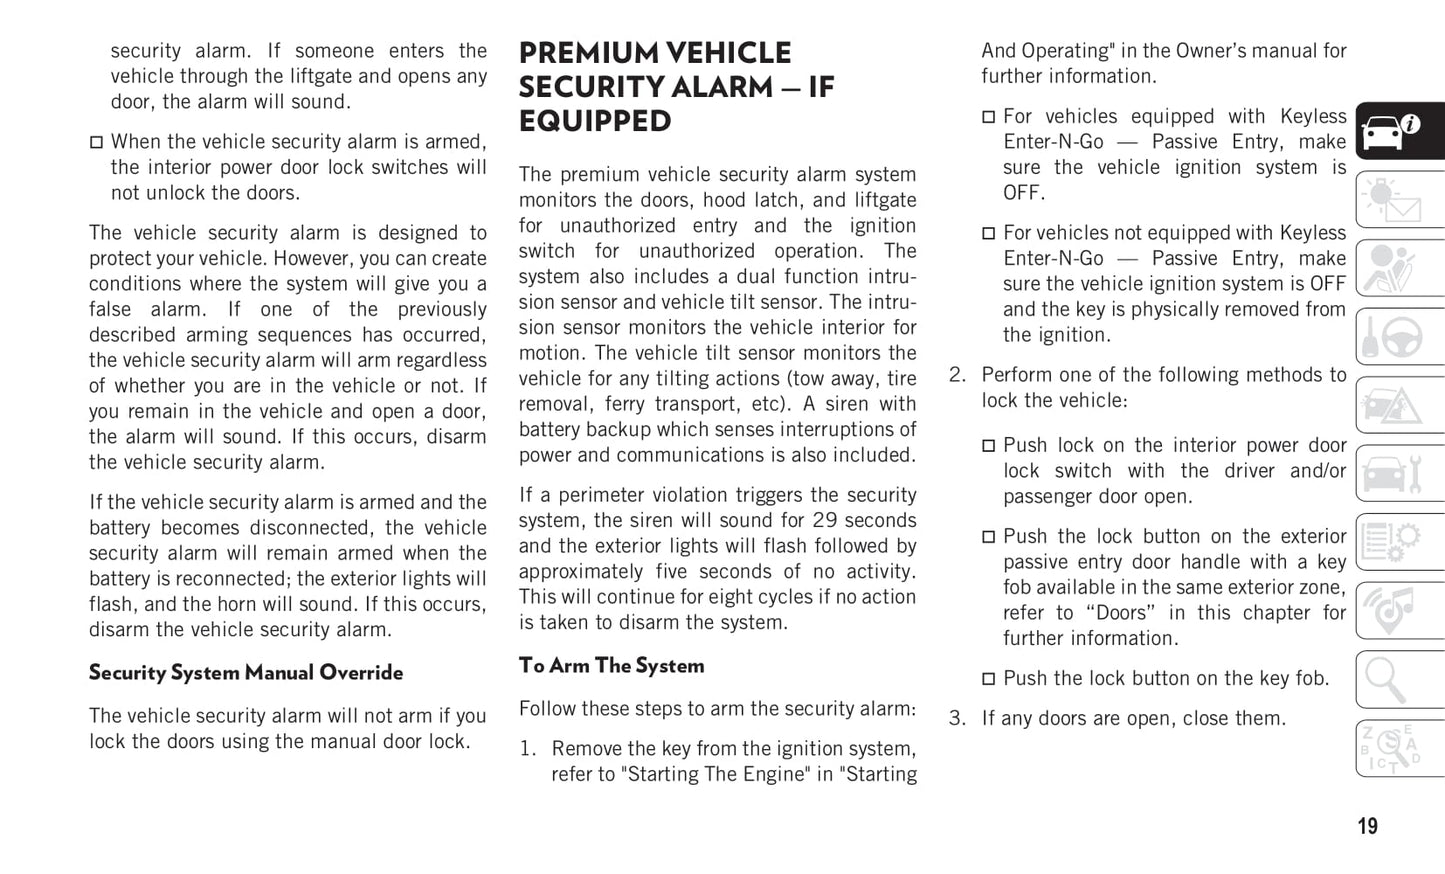 2019-2020 Jeep Compass Owner's Manual | English